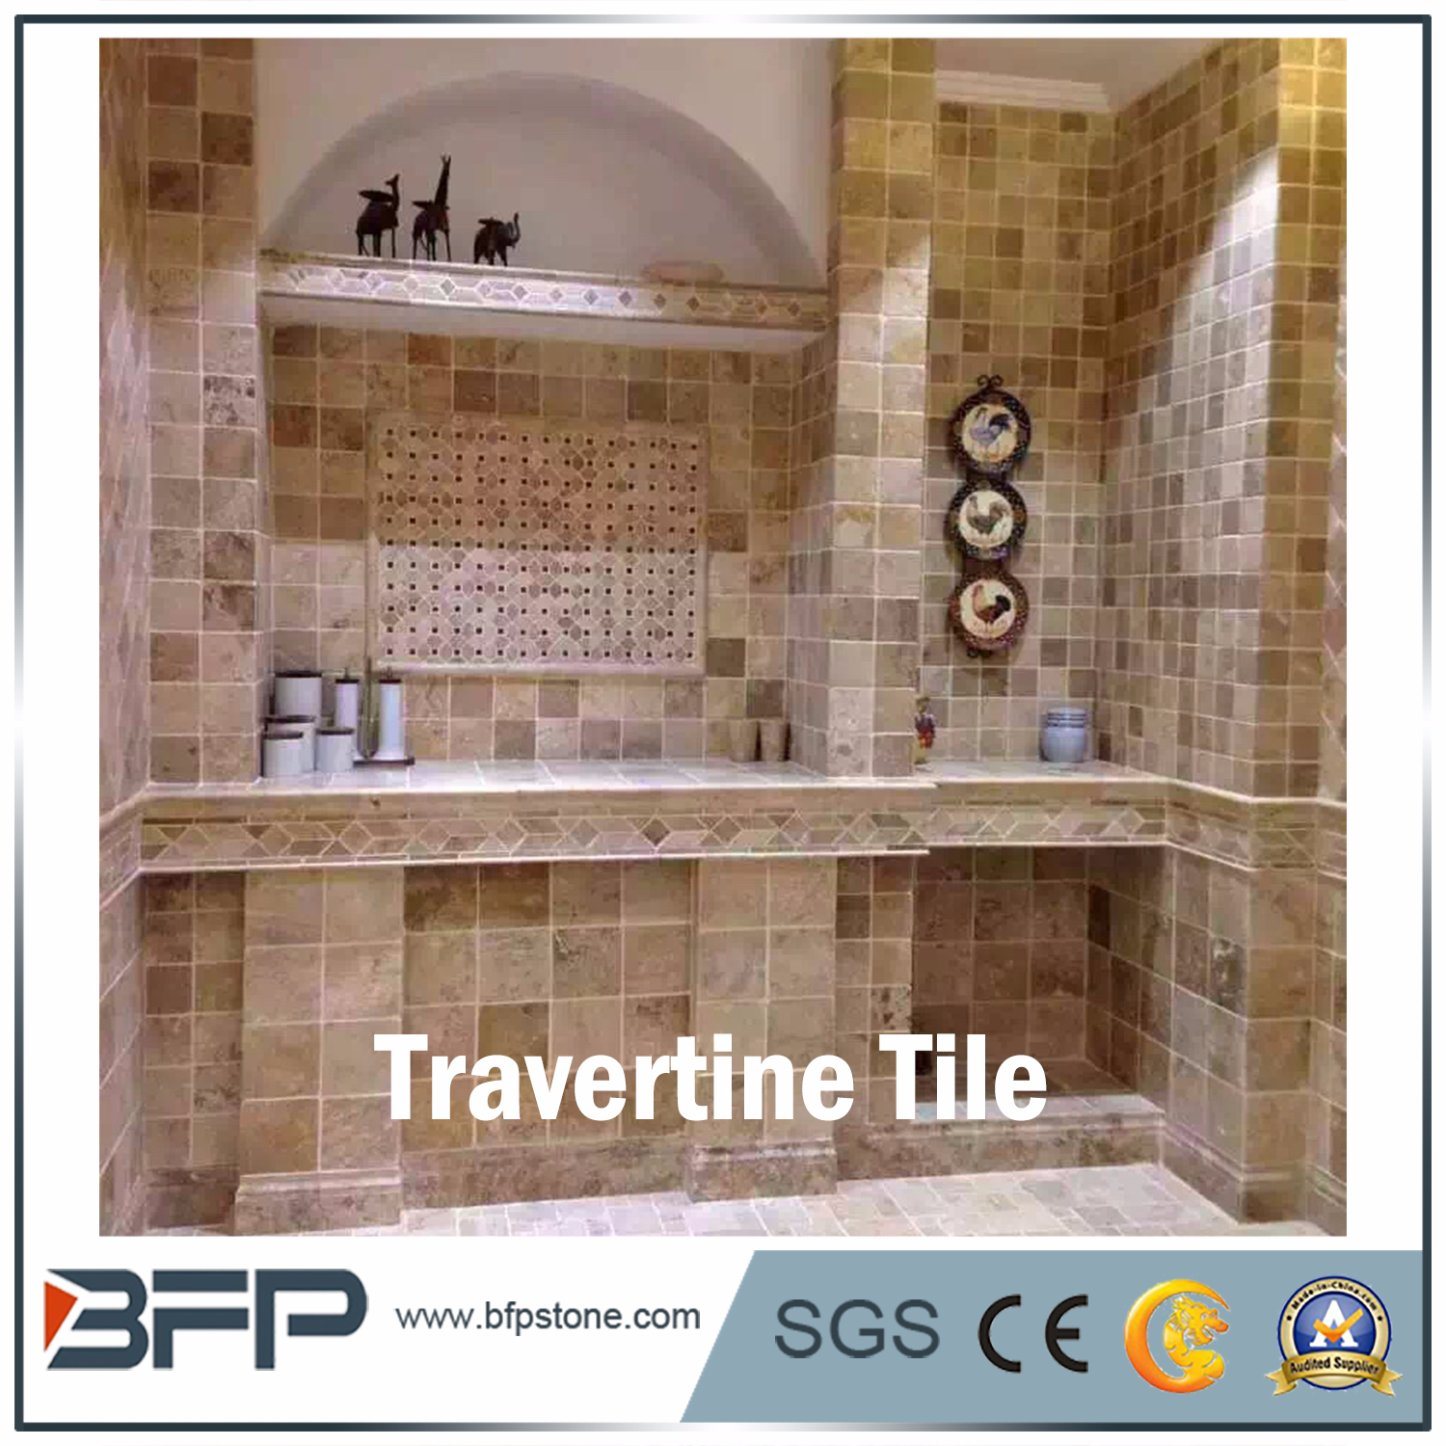 Yellow Travertine Tile for Wall Cladding in Bathroom and Kitchenroom